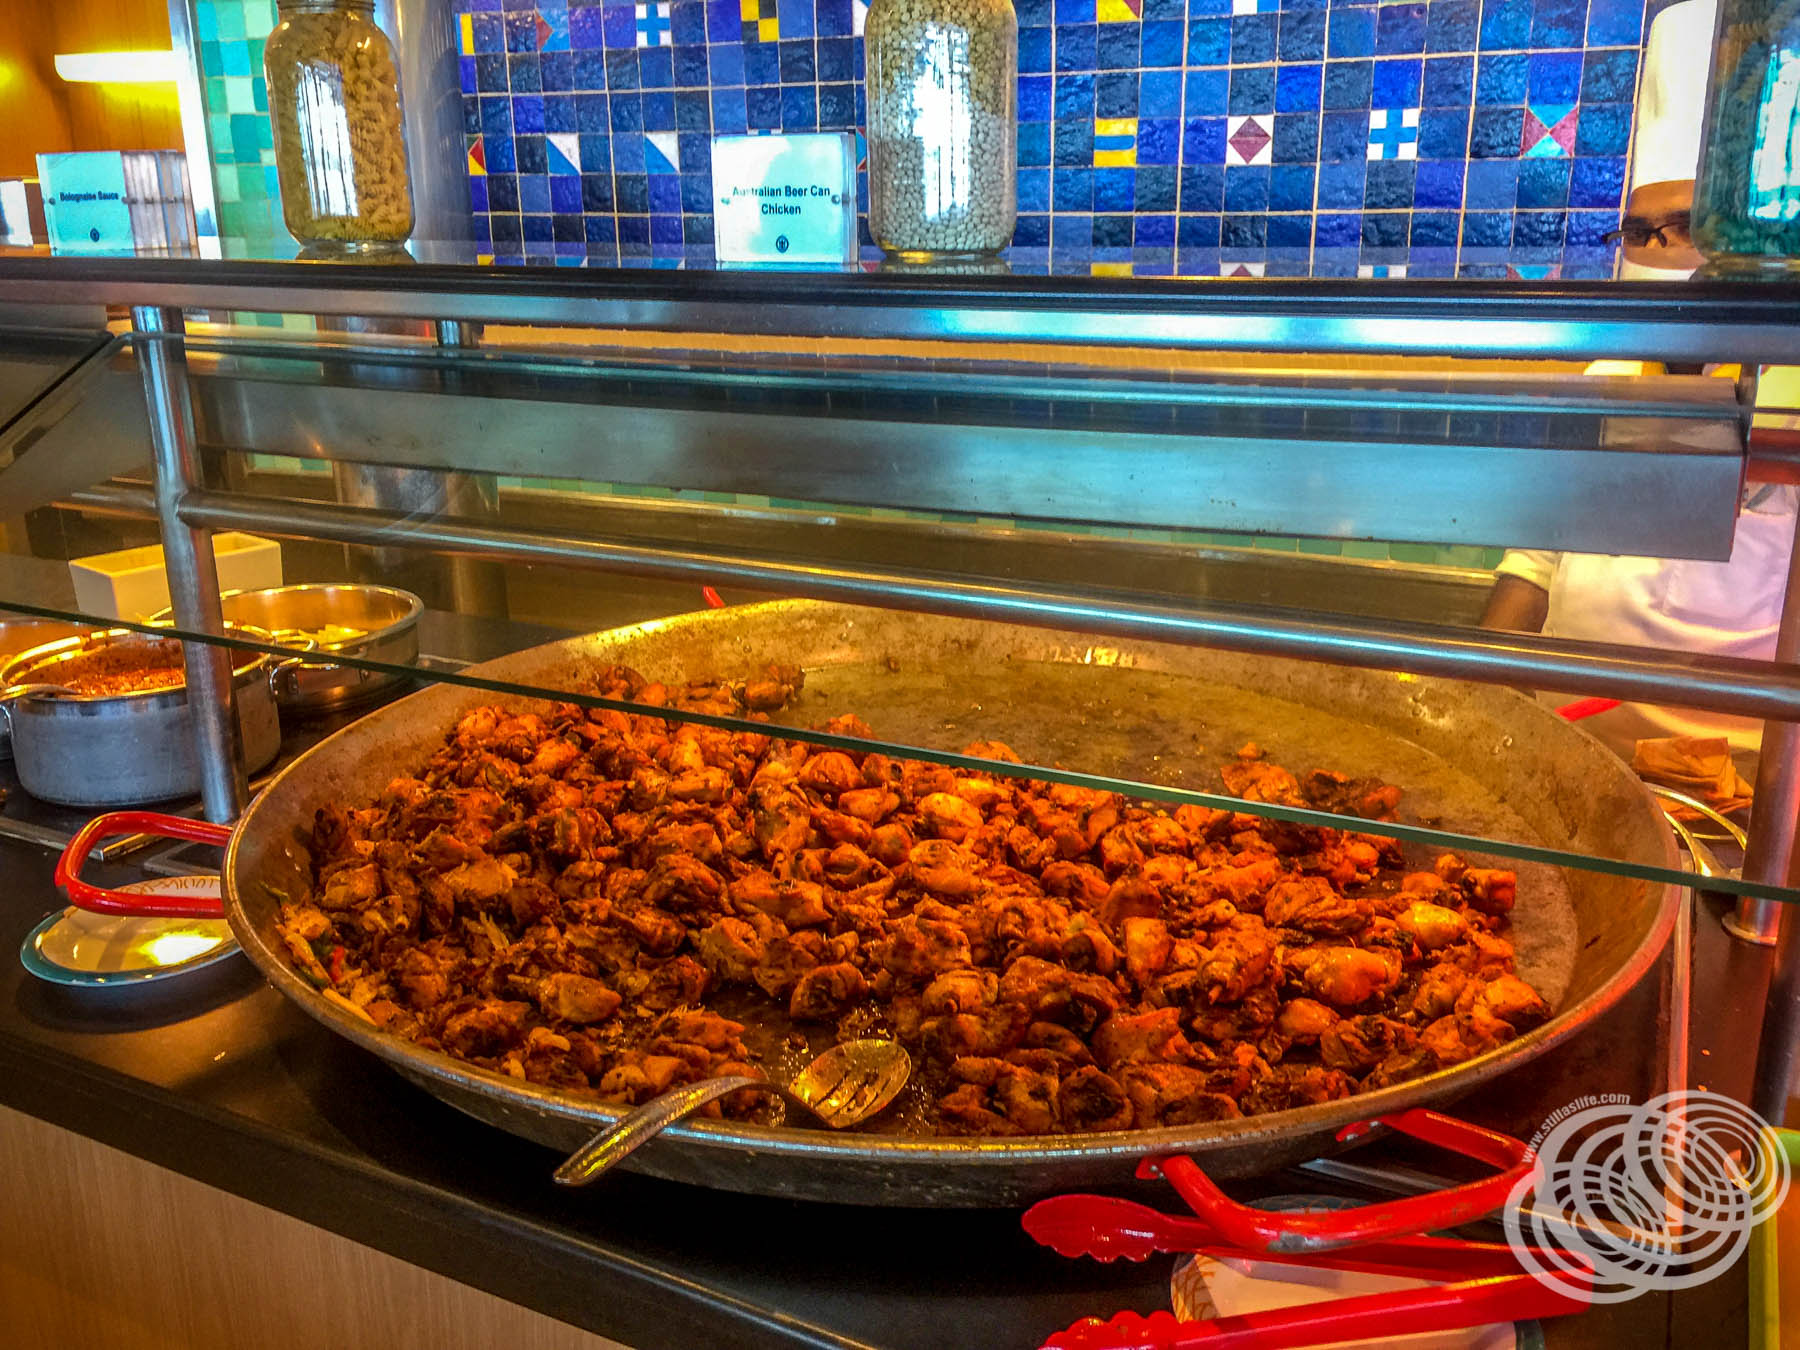 A chicken dish in Windjammer on Explorer of the Seas